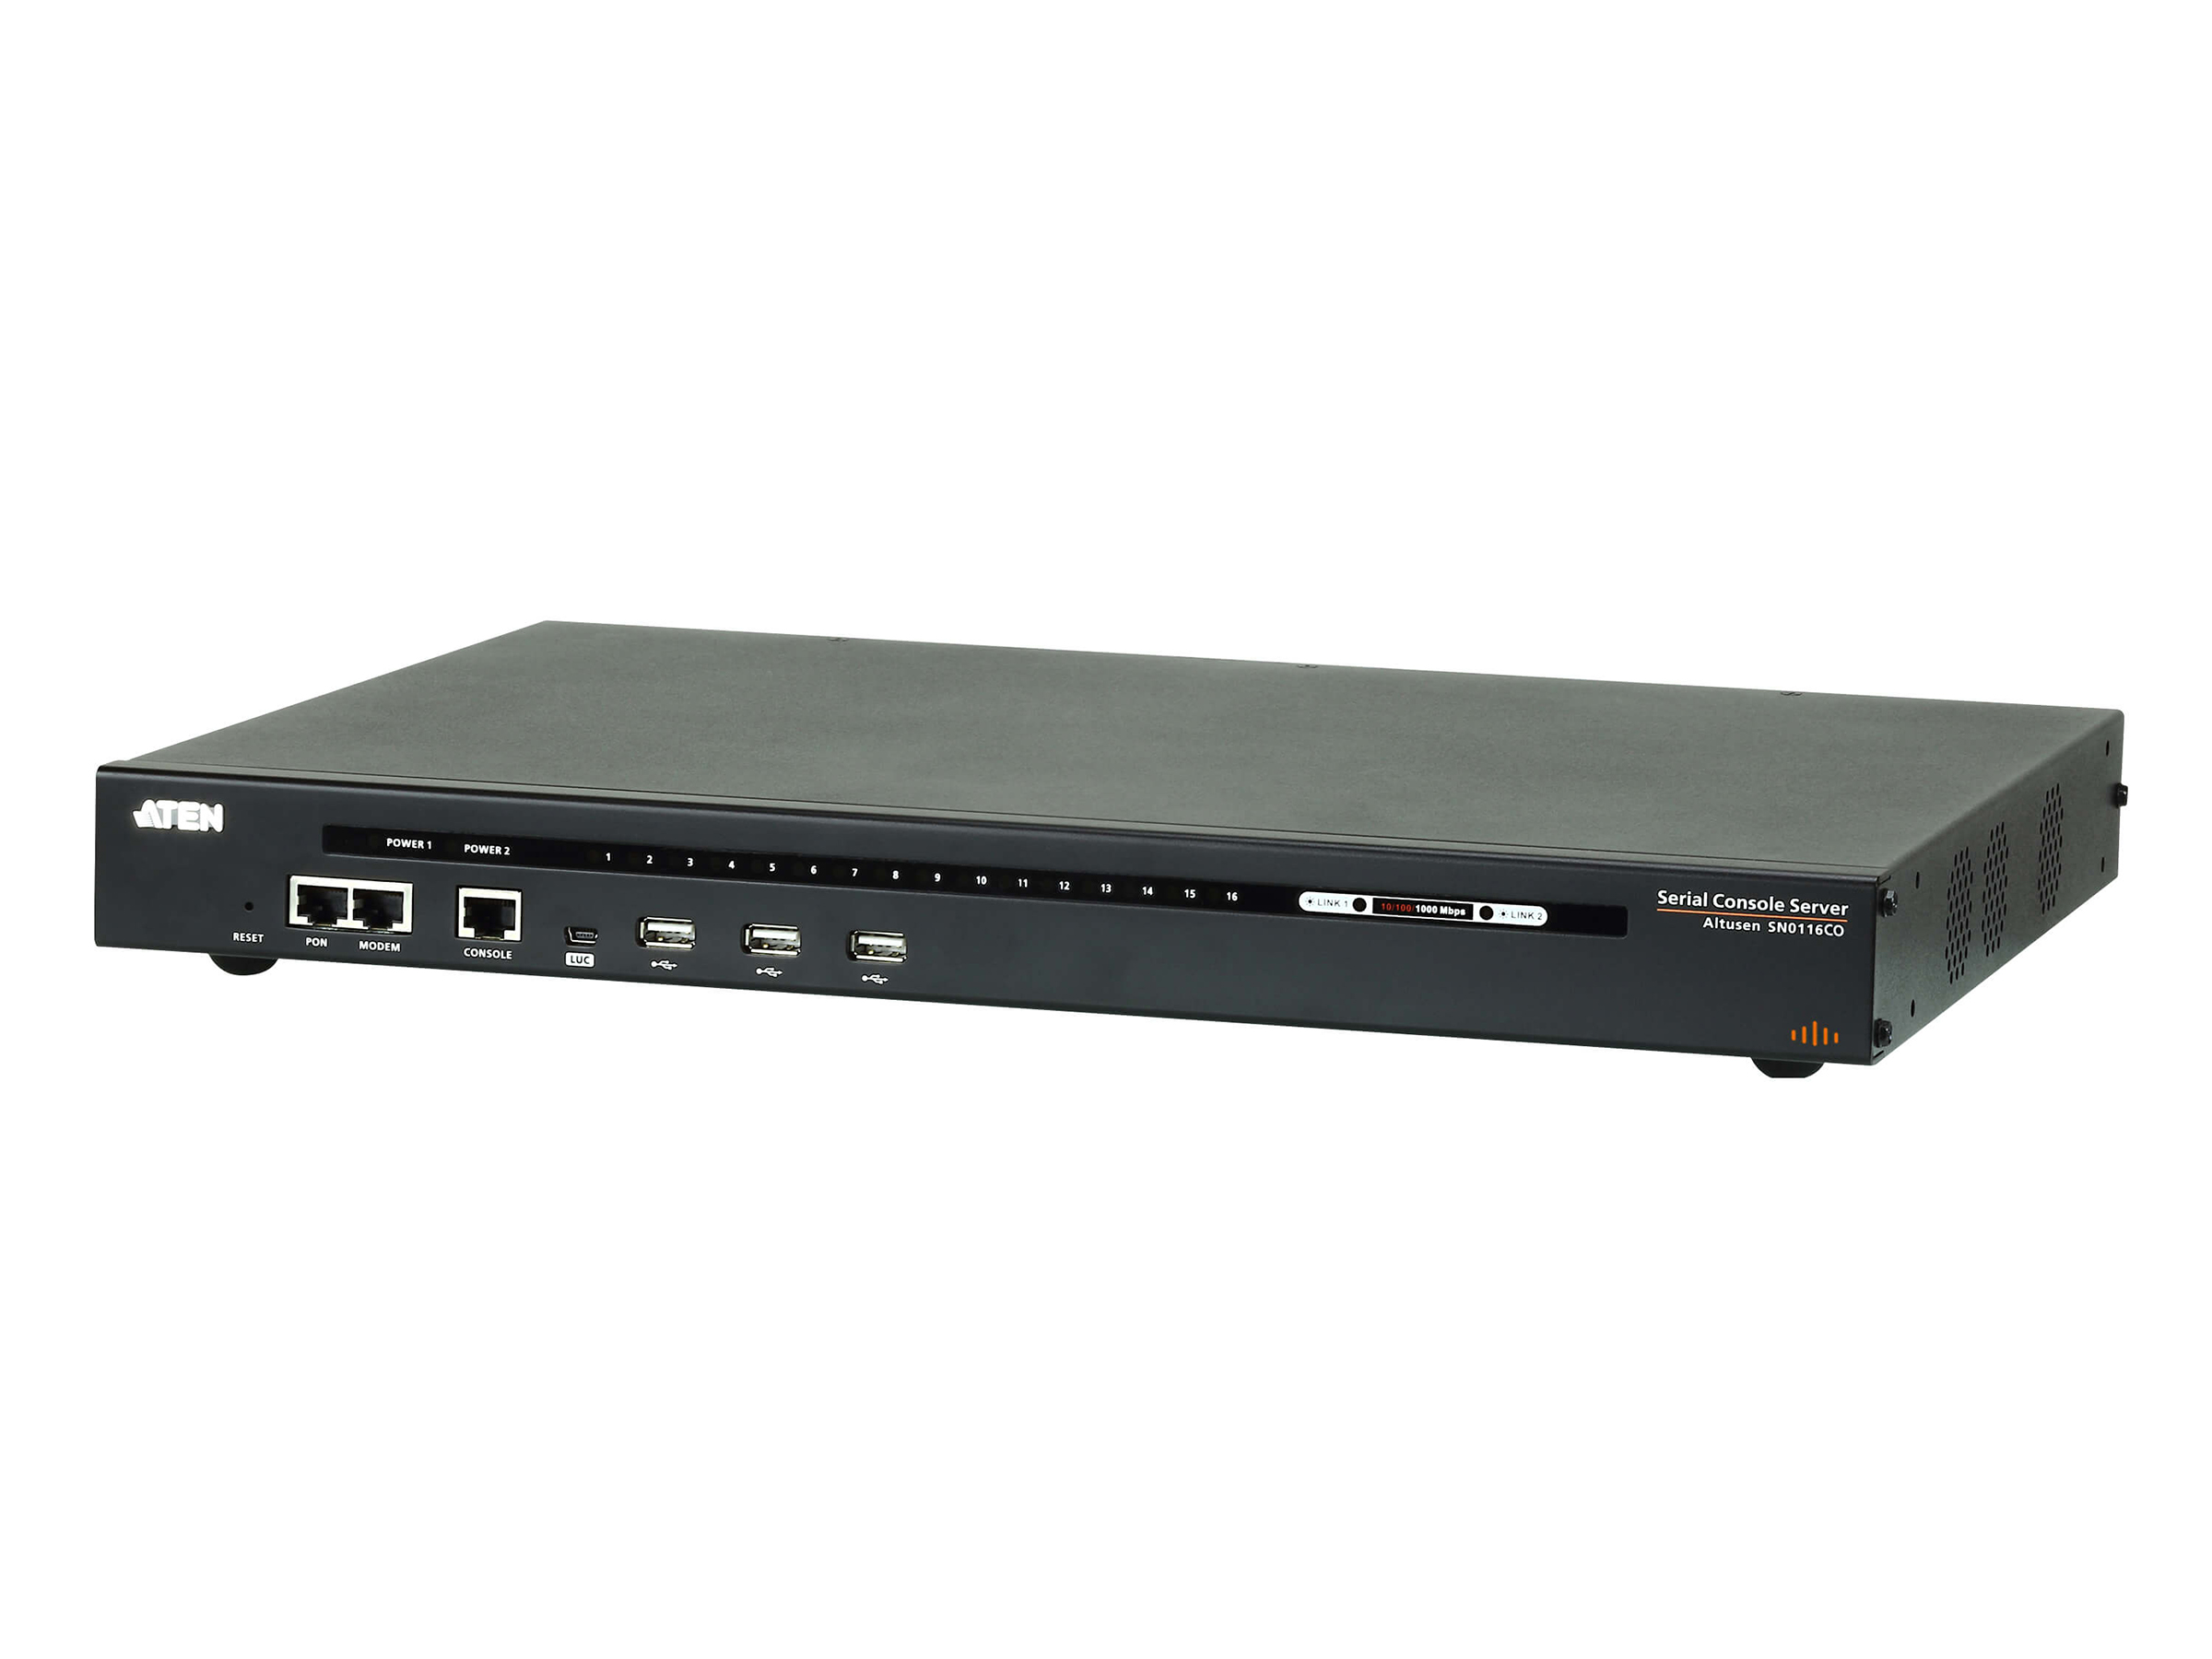 SN0116CO 16-Port Serial Console Server with Dual Power/LAN by Aten